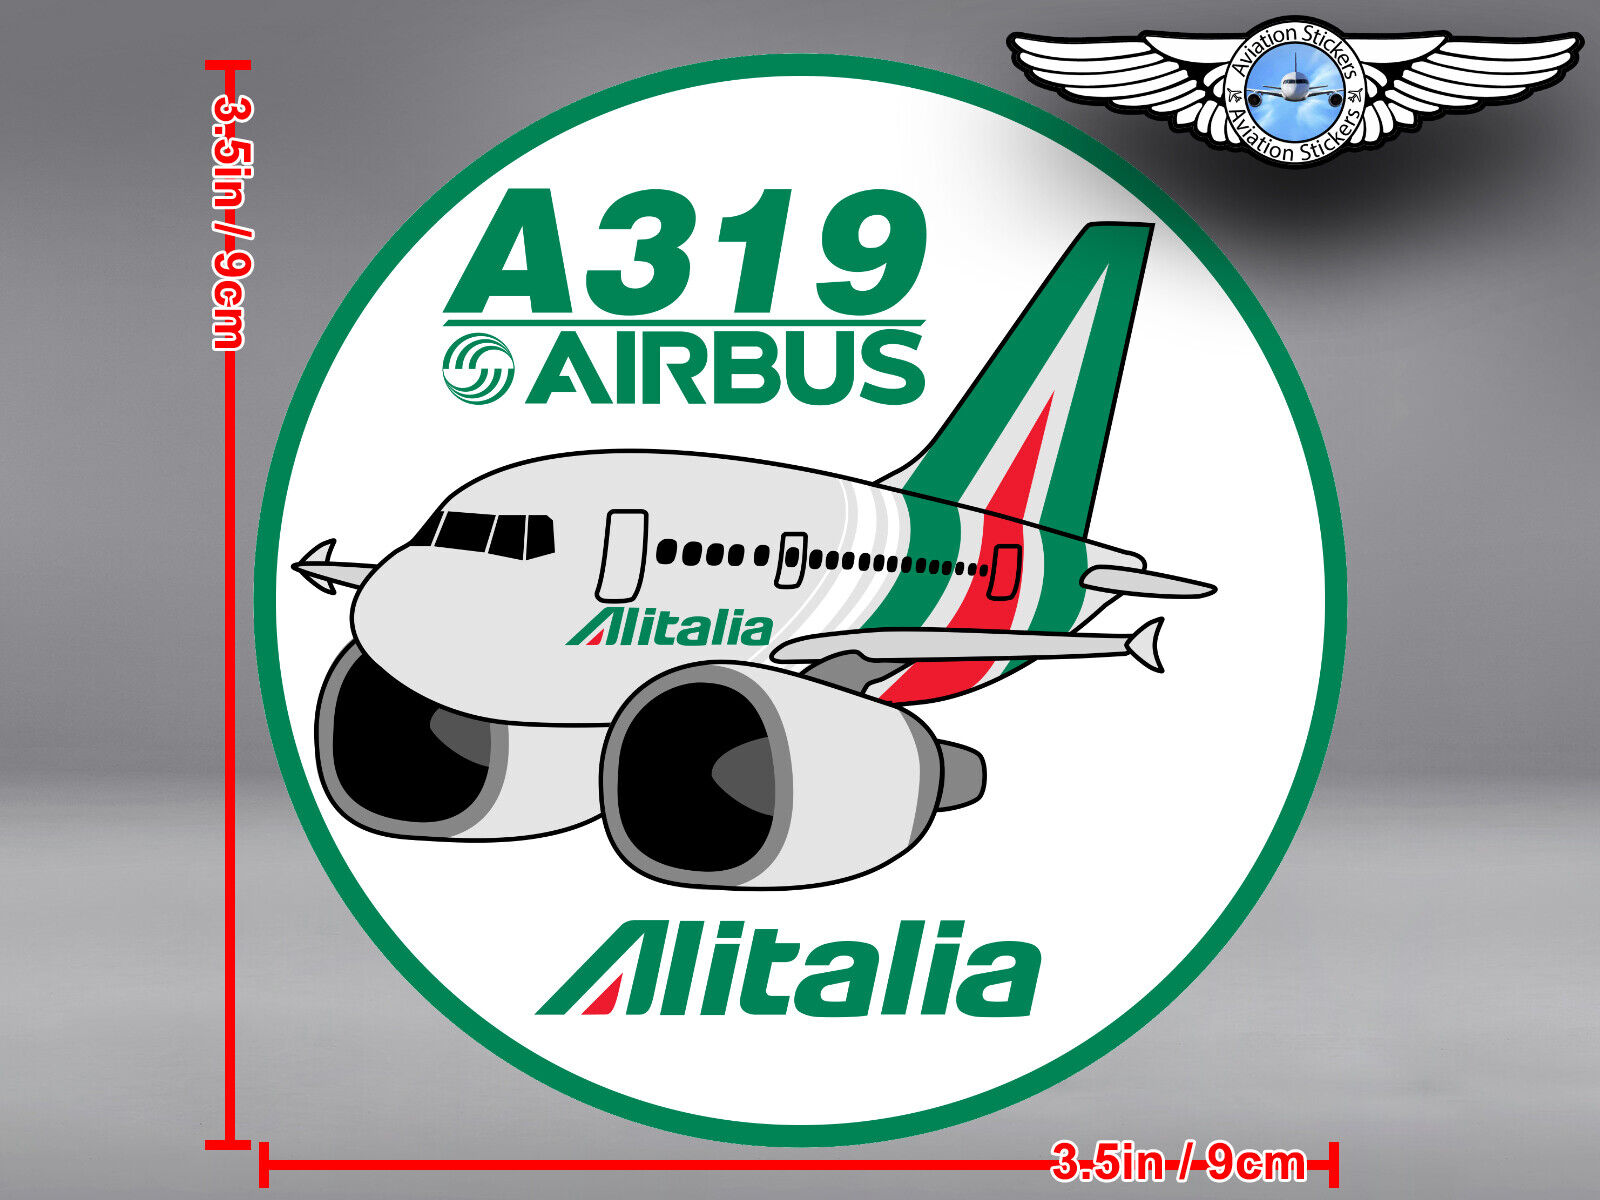 ALITALIA NEW LIVERY PUDGY AIRBUS A319 ROUND DECAL / STICKER 